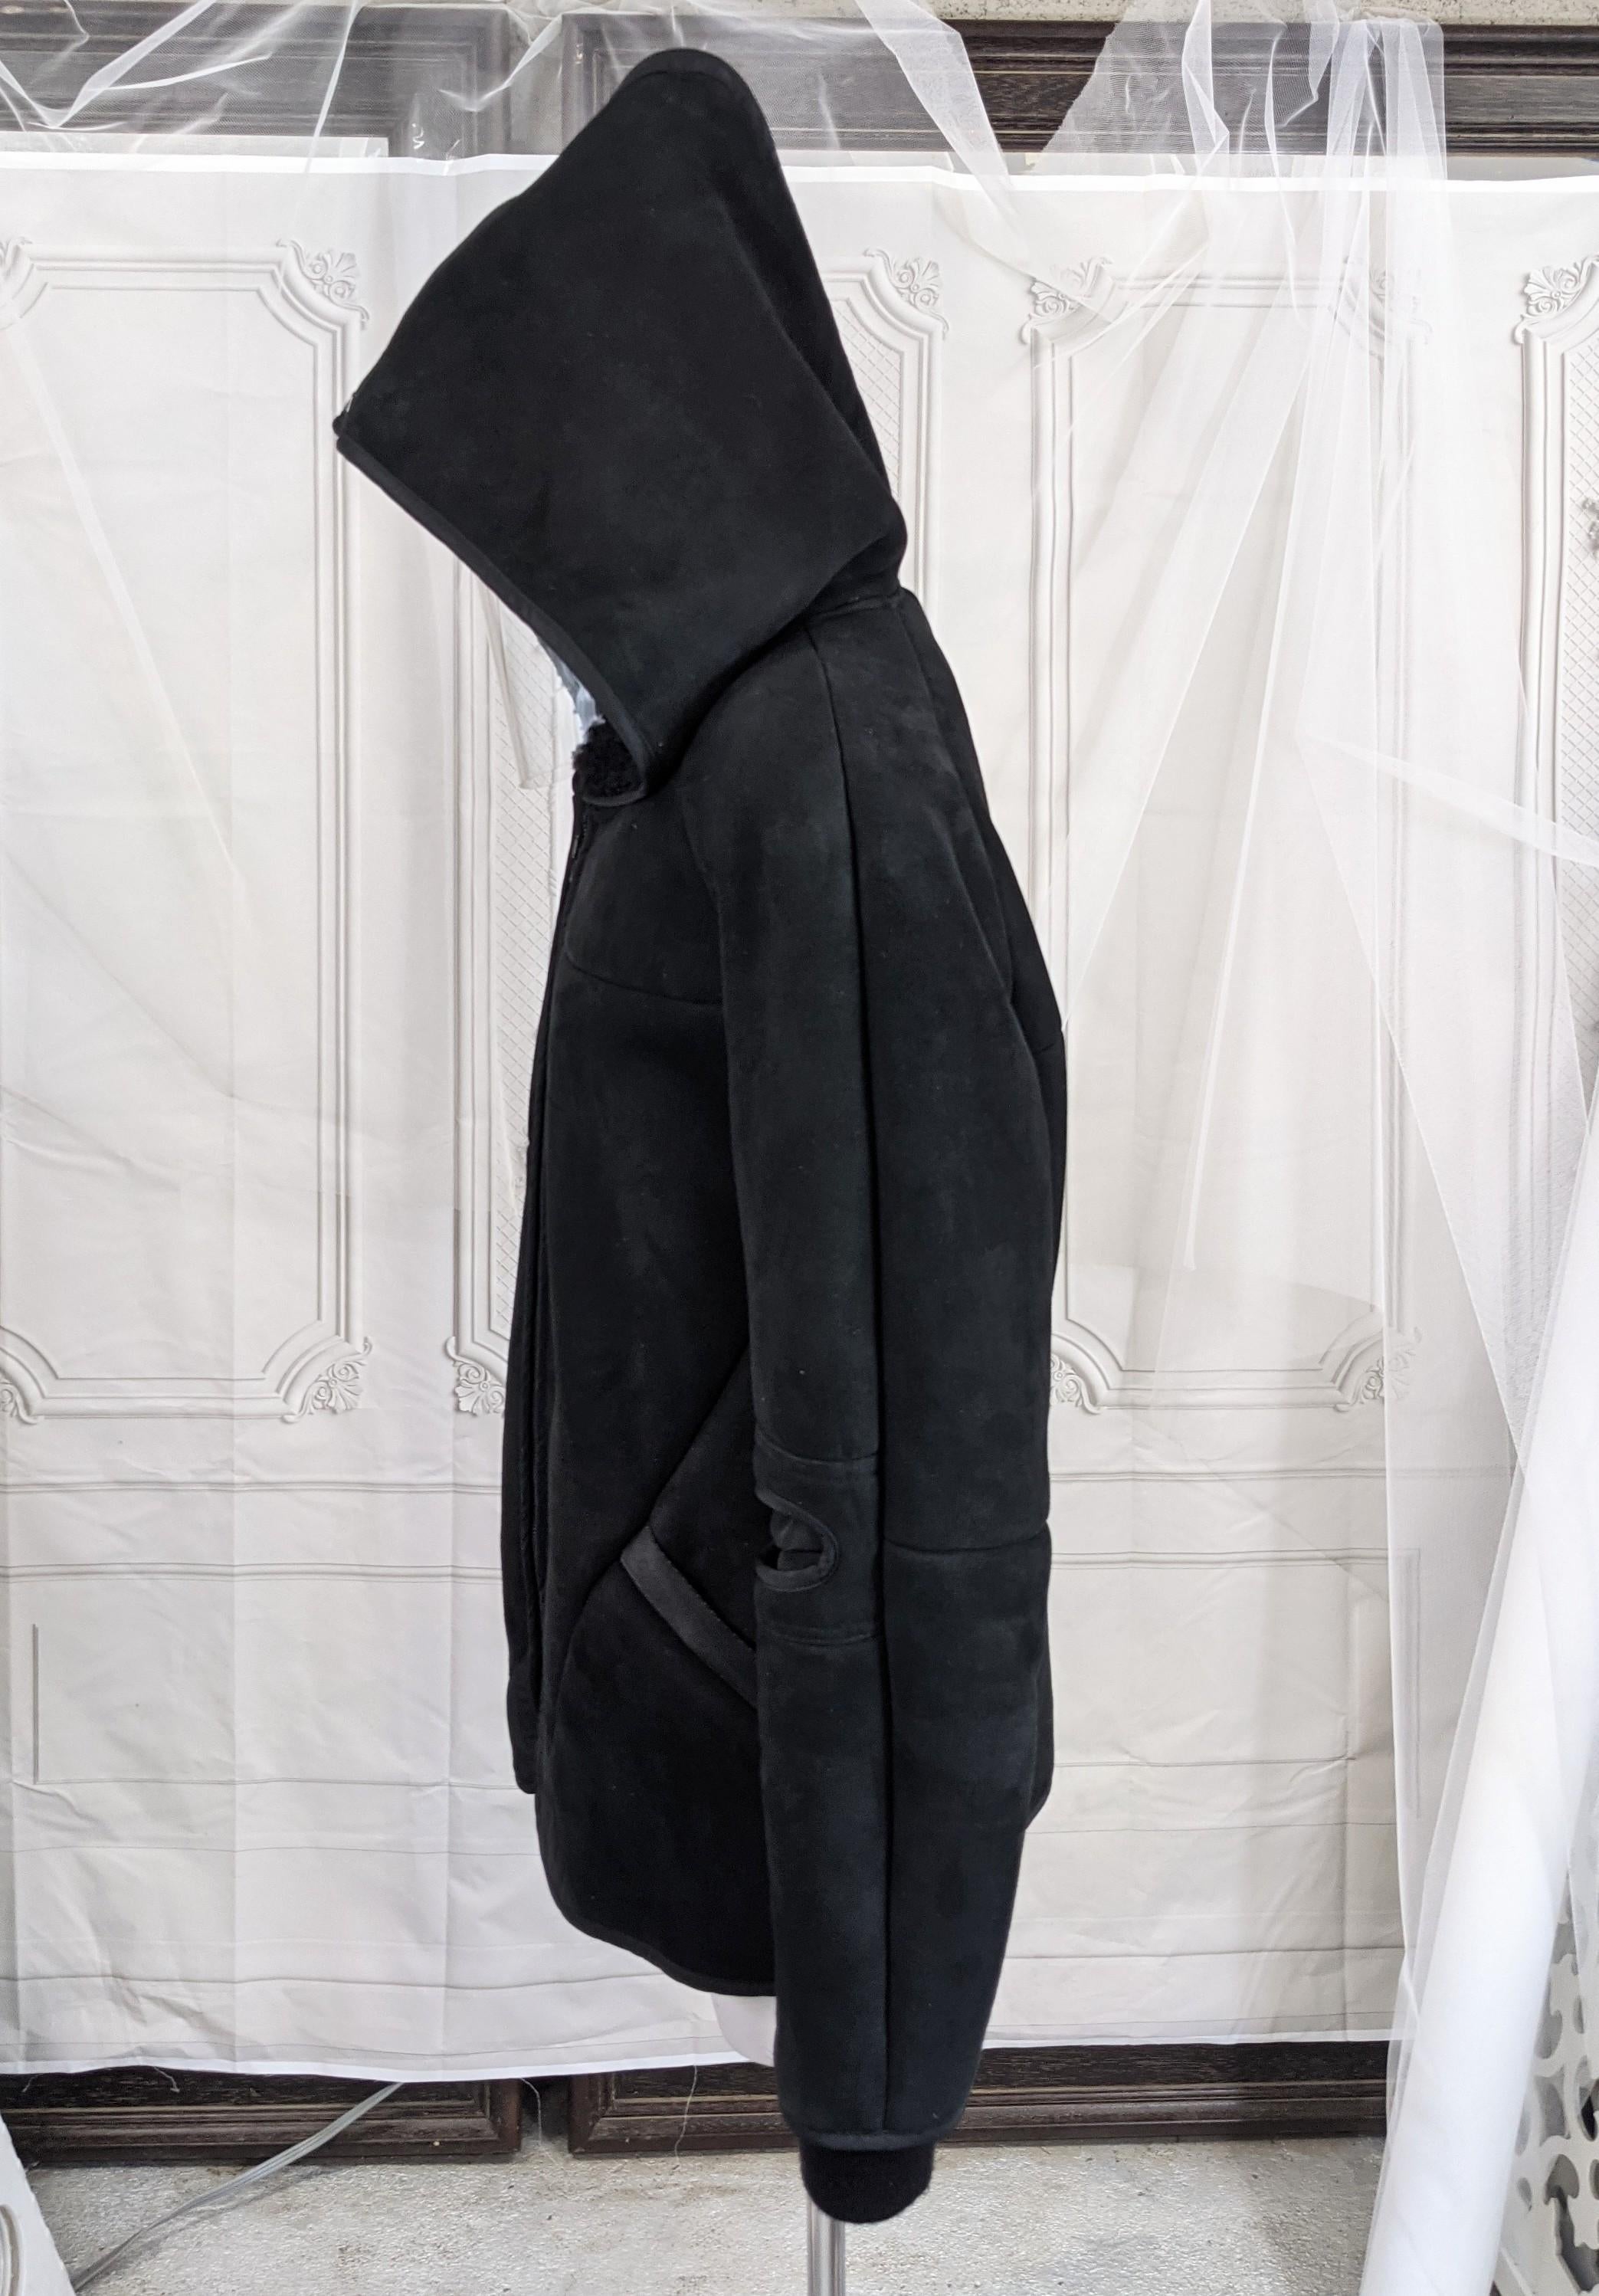 Cool Alexander Wang Suede Shearling Hoodie from the AW Black label line. Designed as zippered 